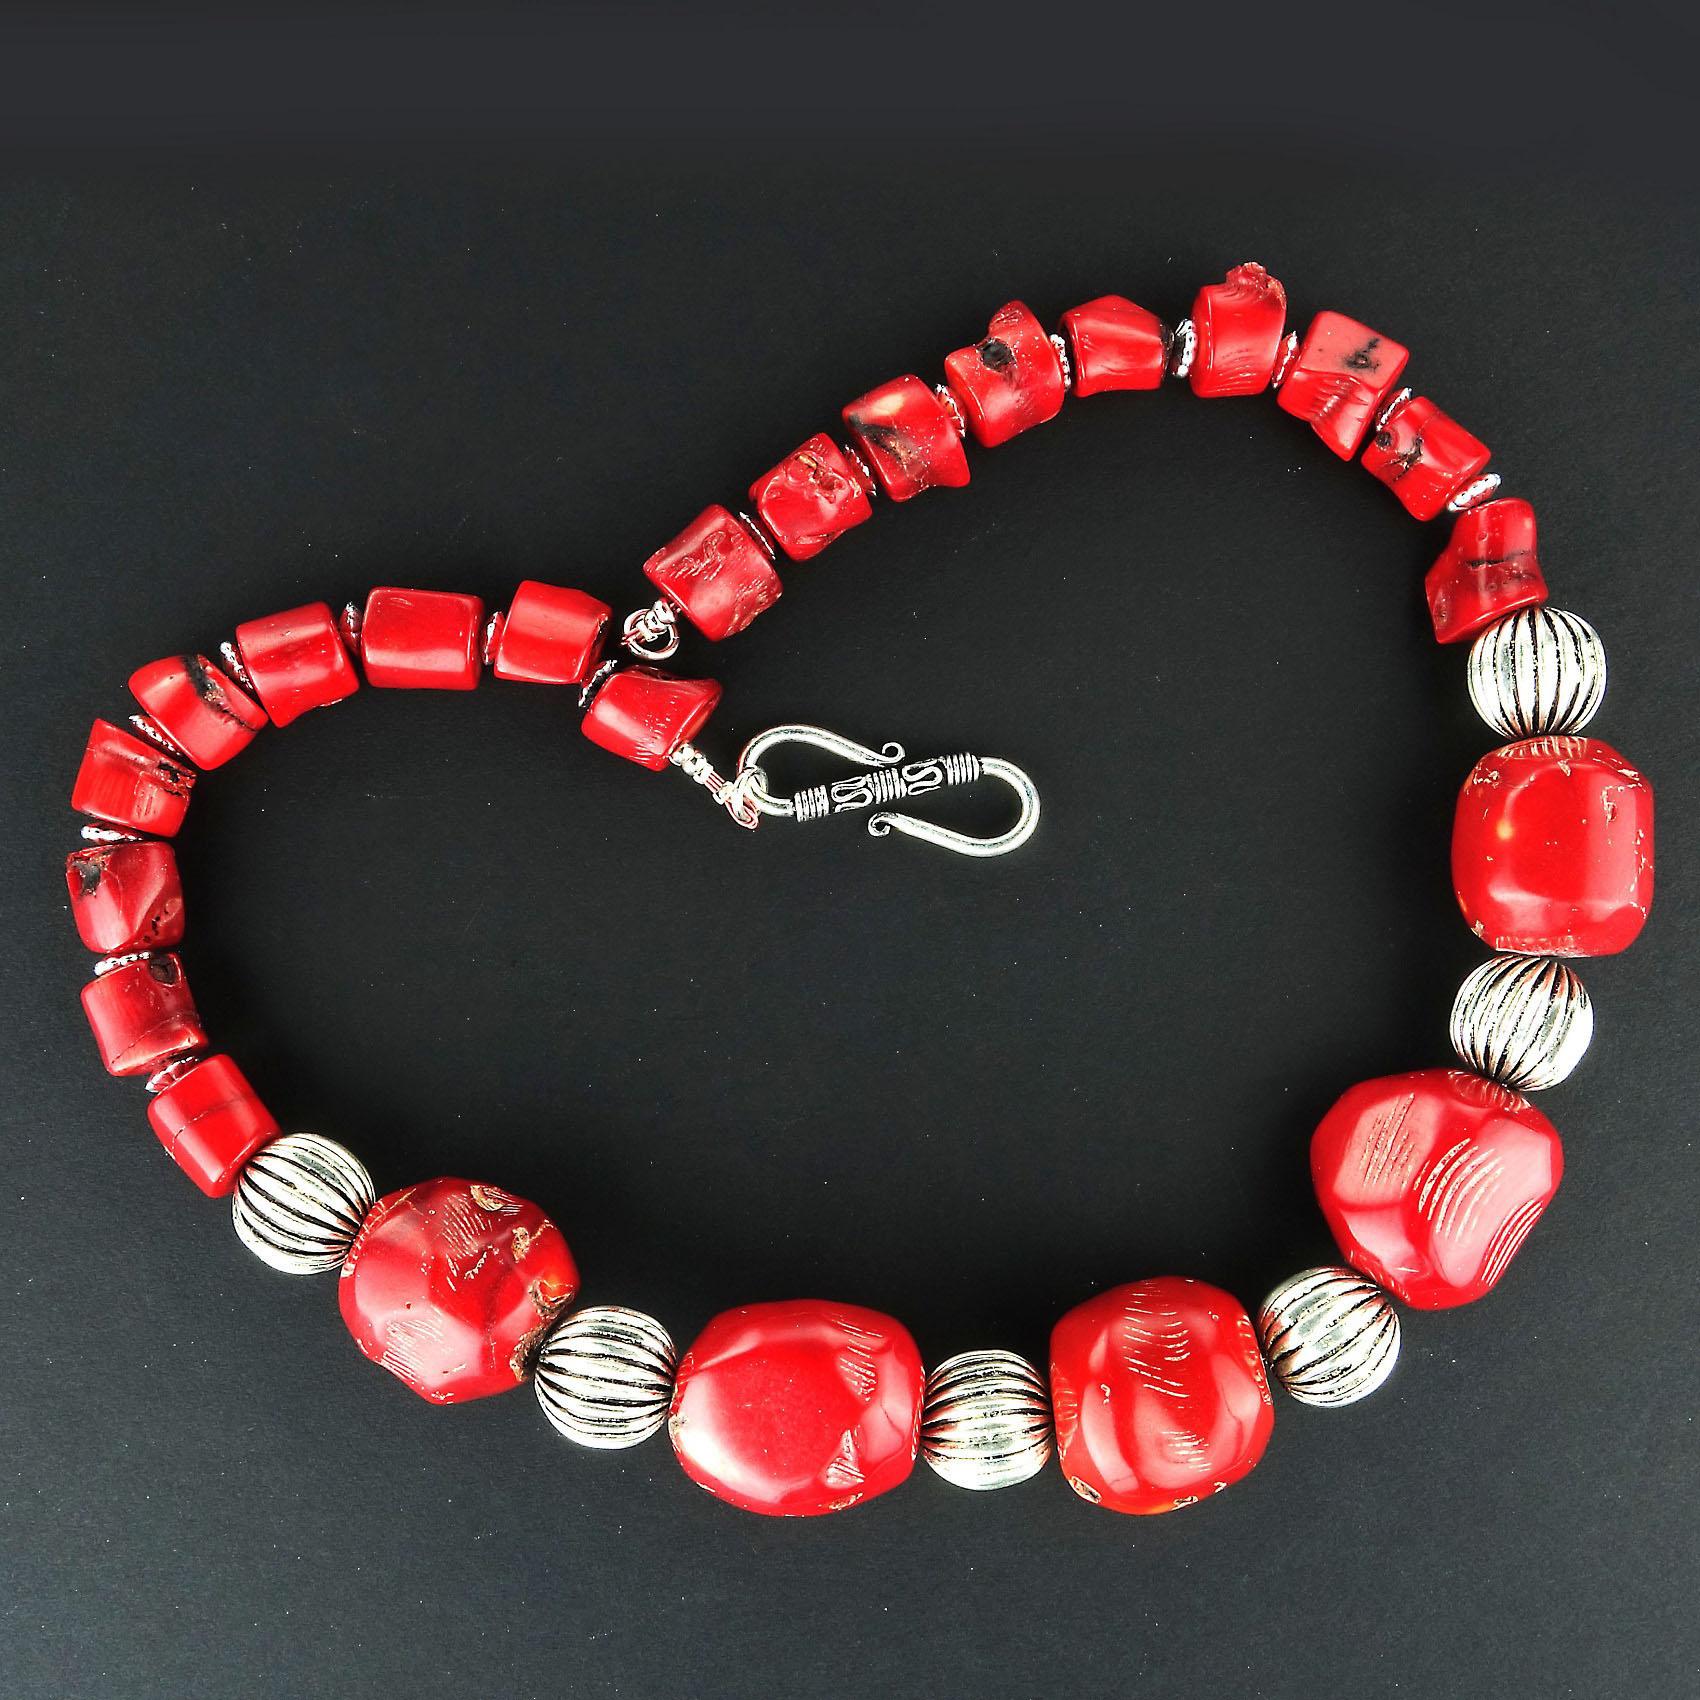 Necklace of Red Bamboo Coral with Silver tone Accents.  The five large coral pieces in front measure approximates 23x21mm.  The smaller red bamboo coral a approximately 10x9mm.  This necklace is a sure winner wherever you want to wear it.   It's 19